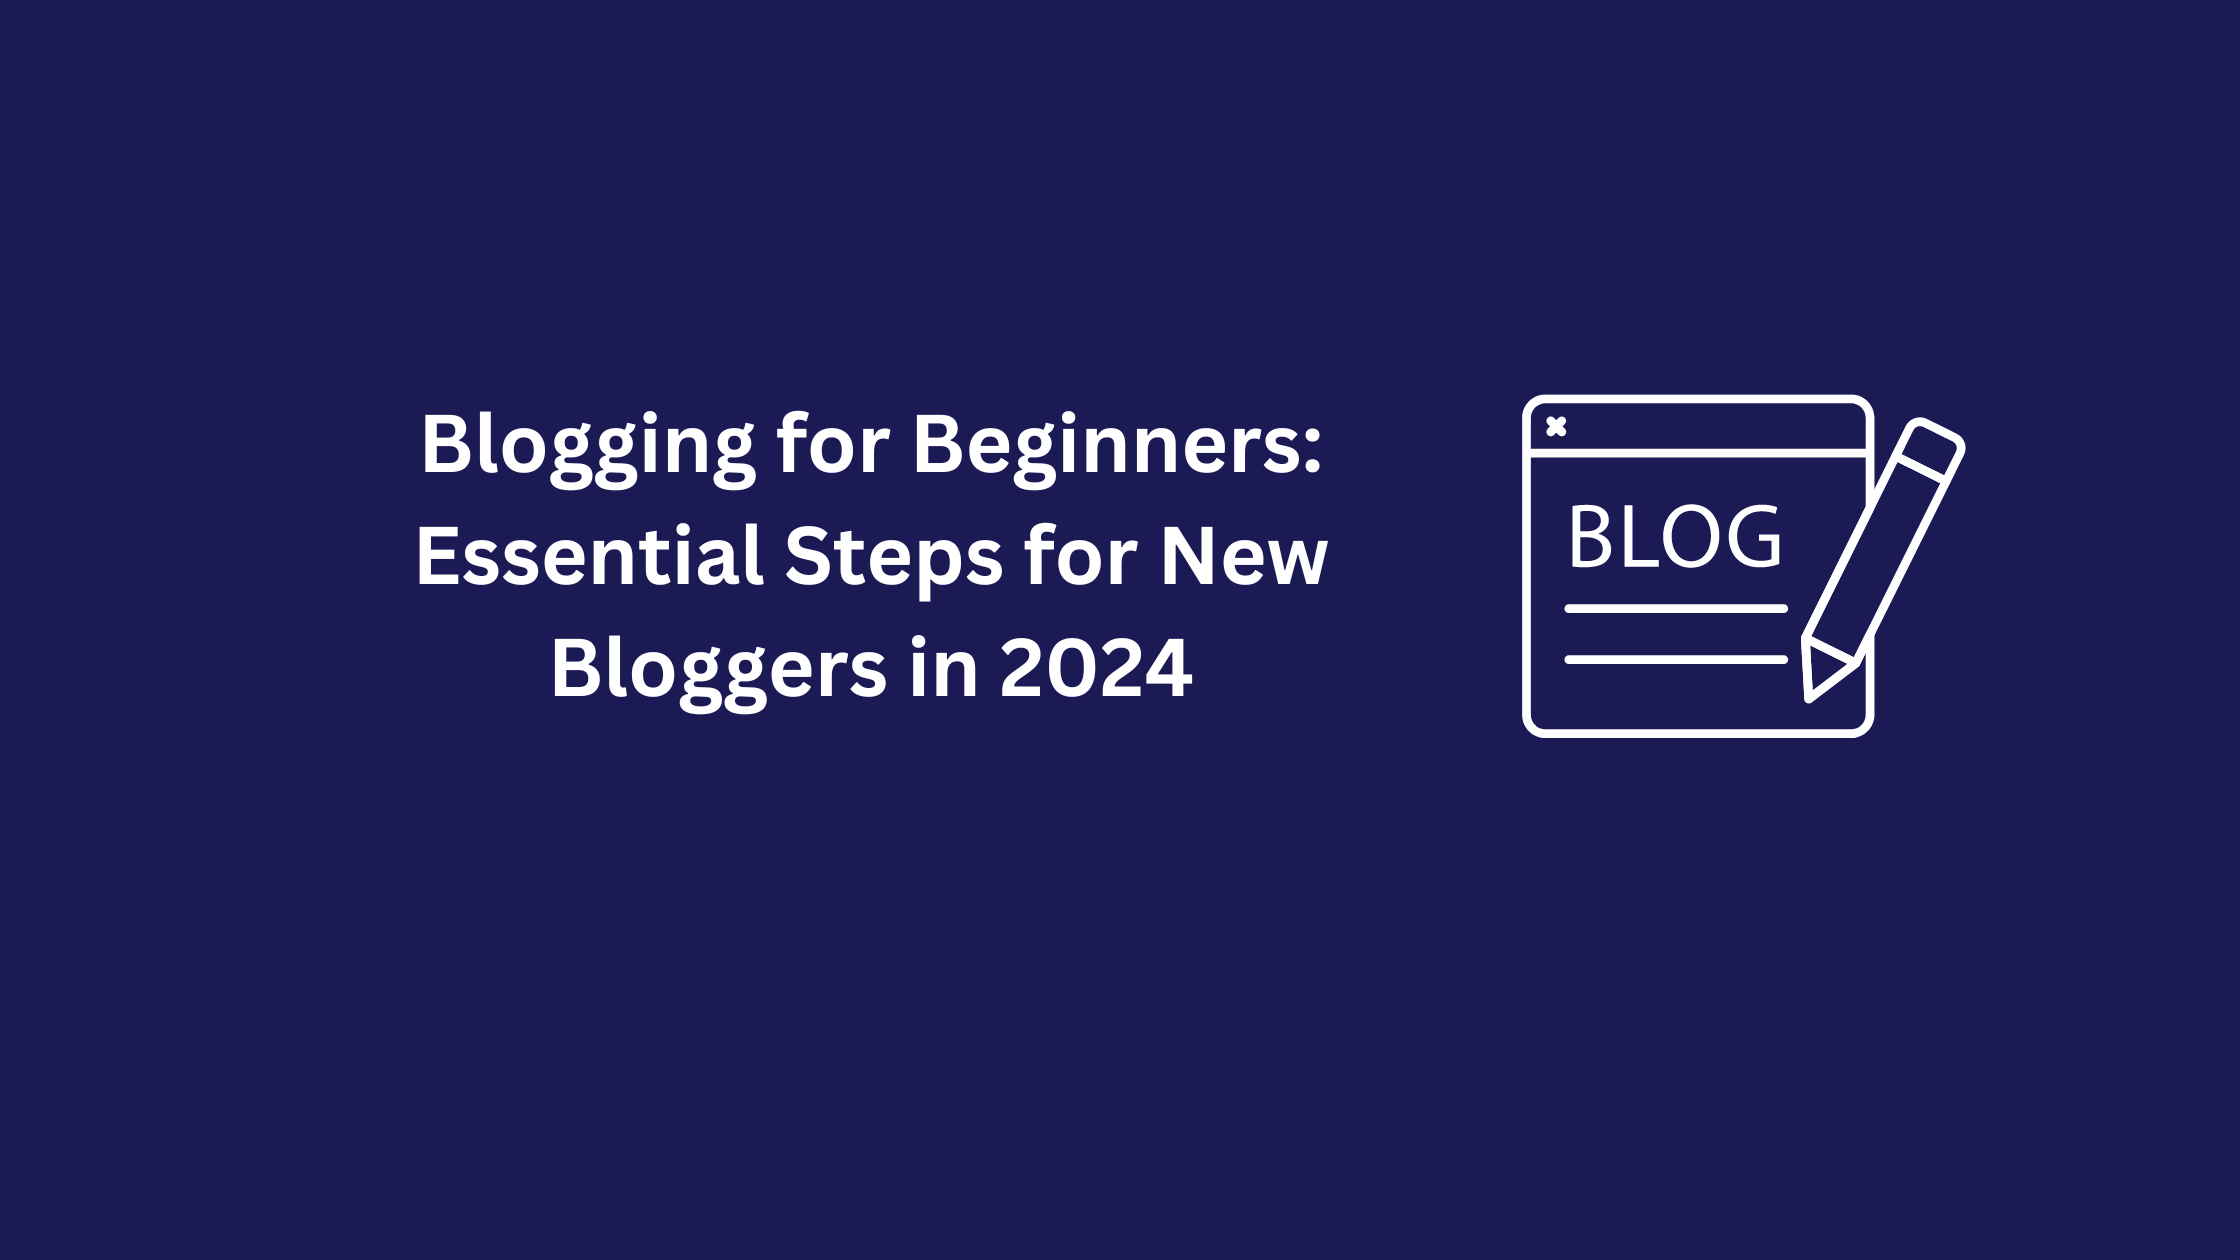 Blogging for Beginners: Essential Steps for New Bloggers in 2024